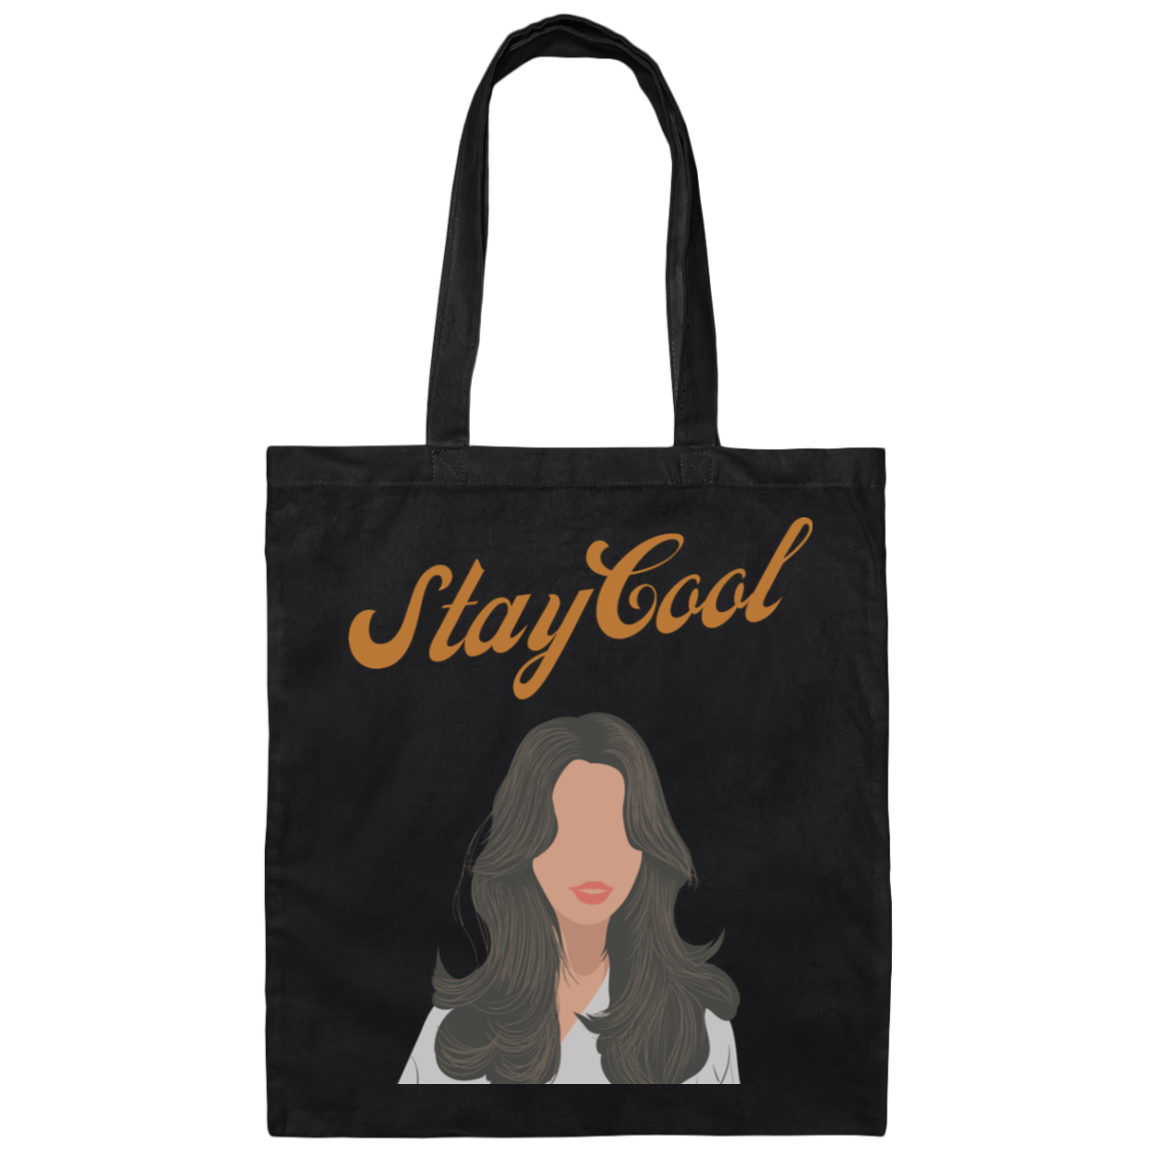 Stay Cool Canvas Tote Bag